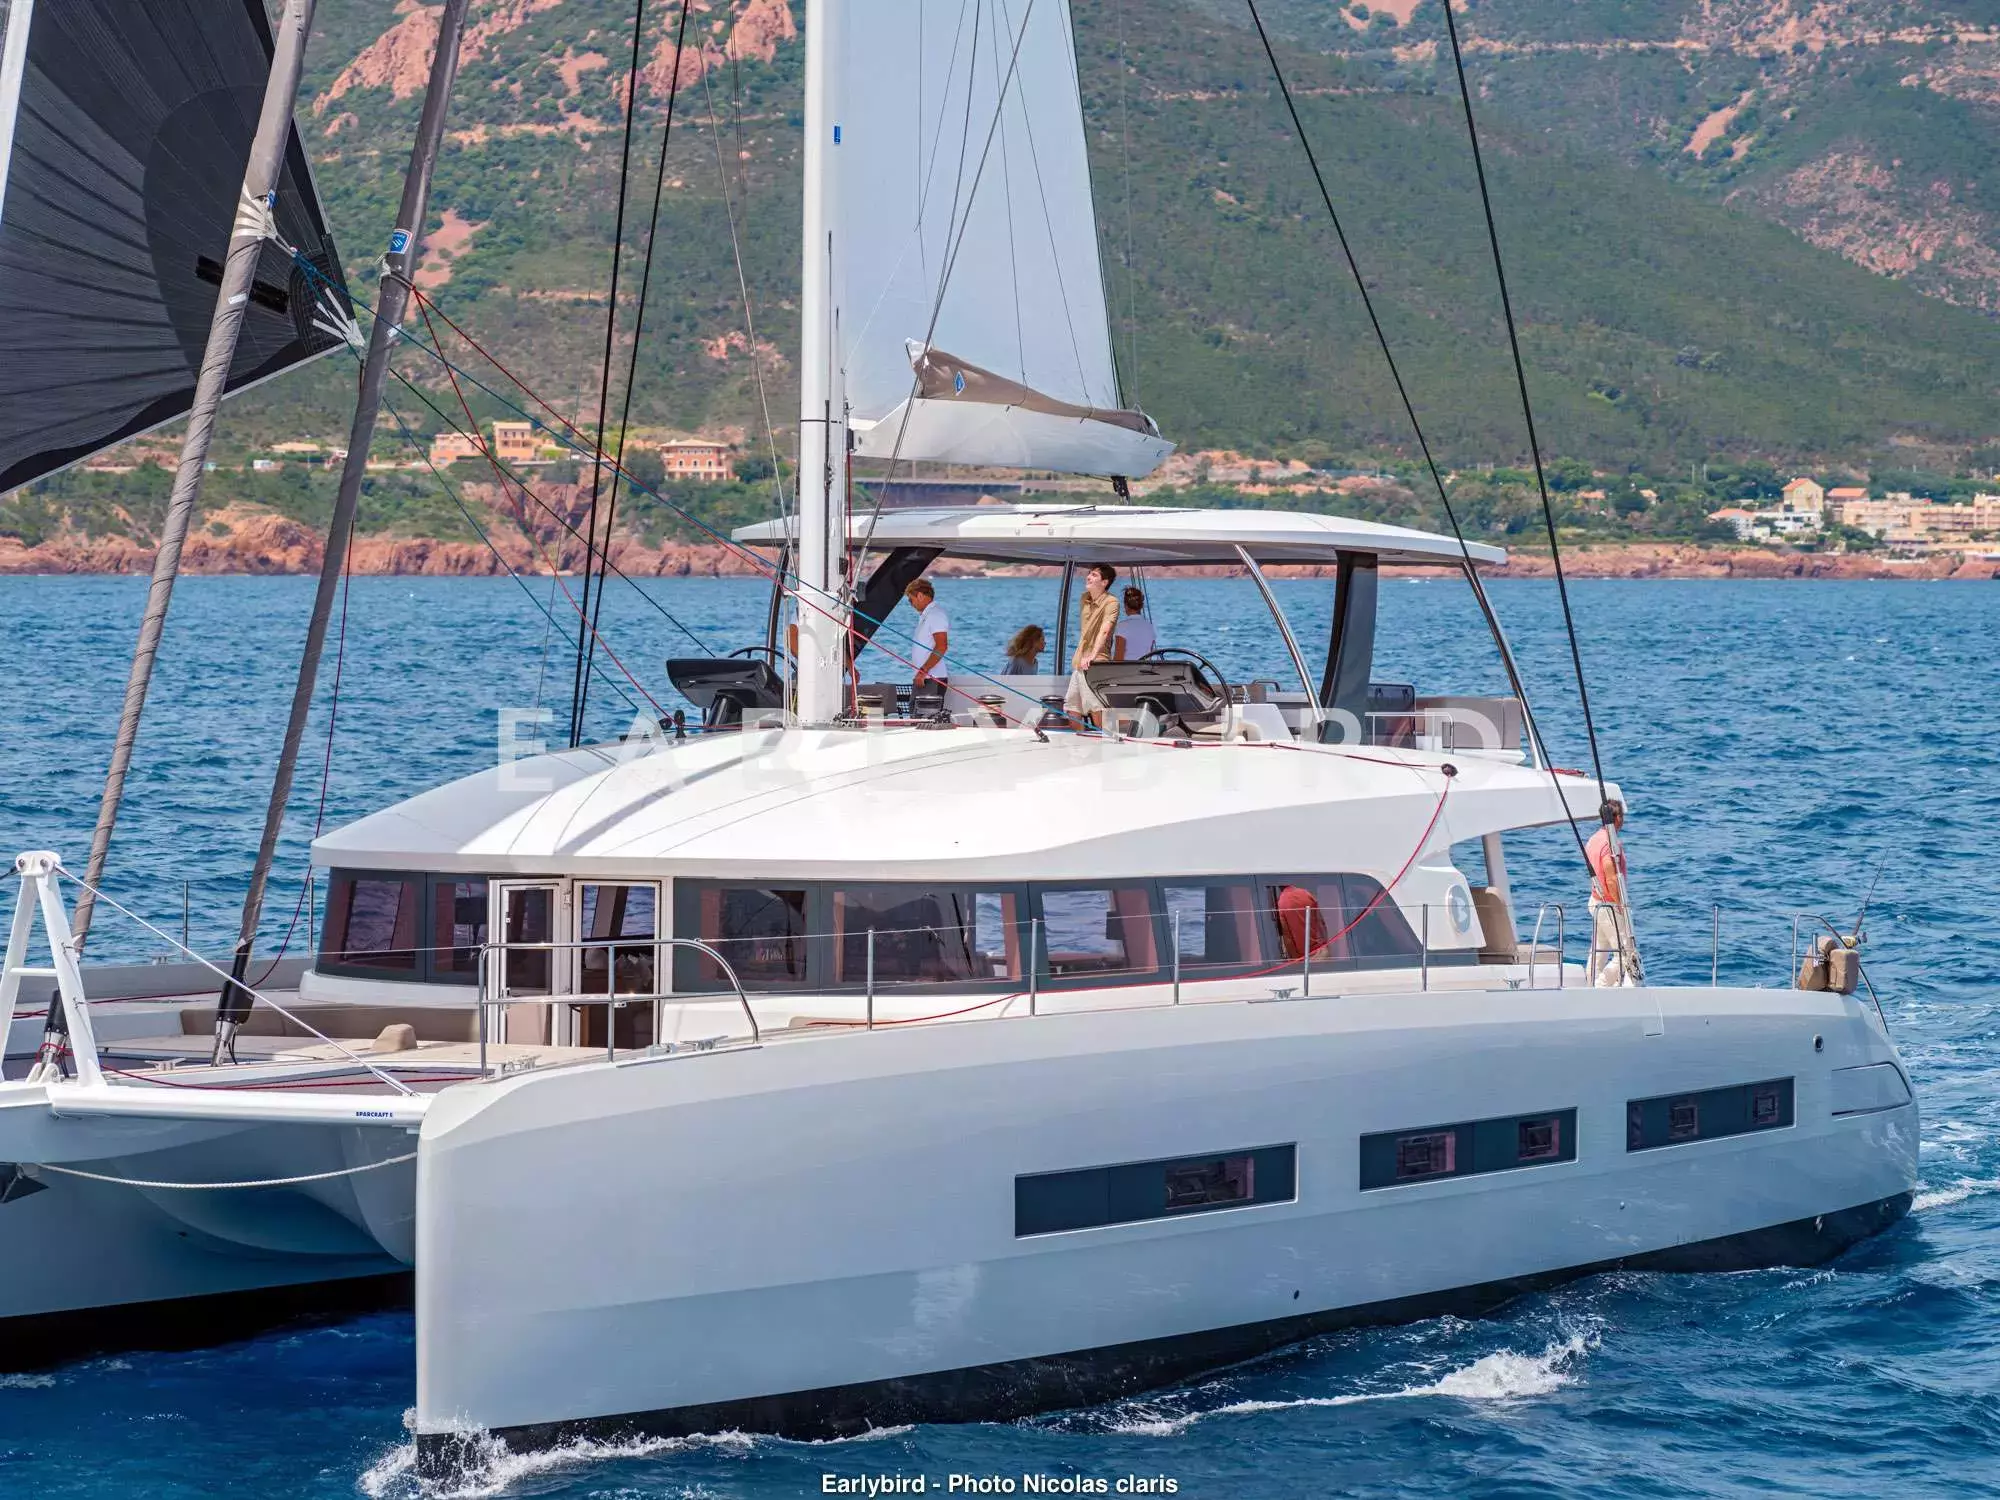 Earlybird by Lagoon - Top rates for a Rental of a private Luxury Catamaran in Italy